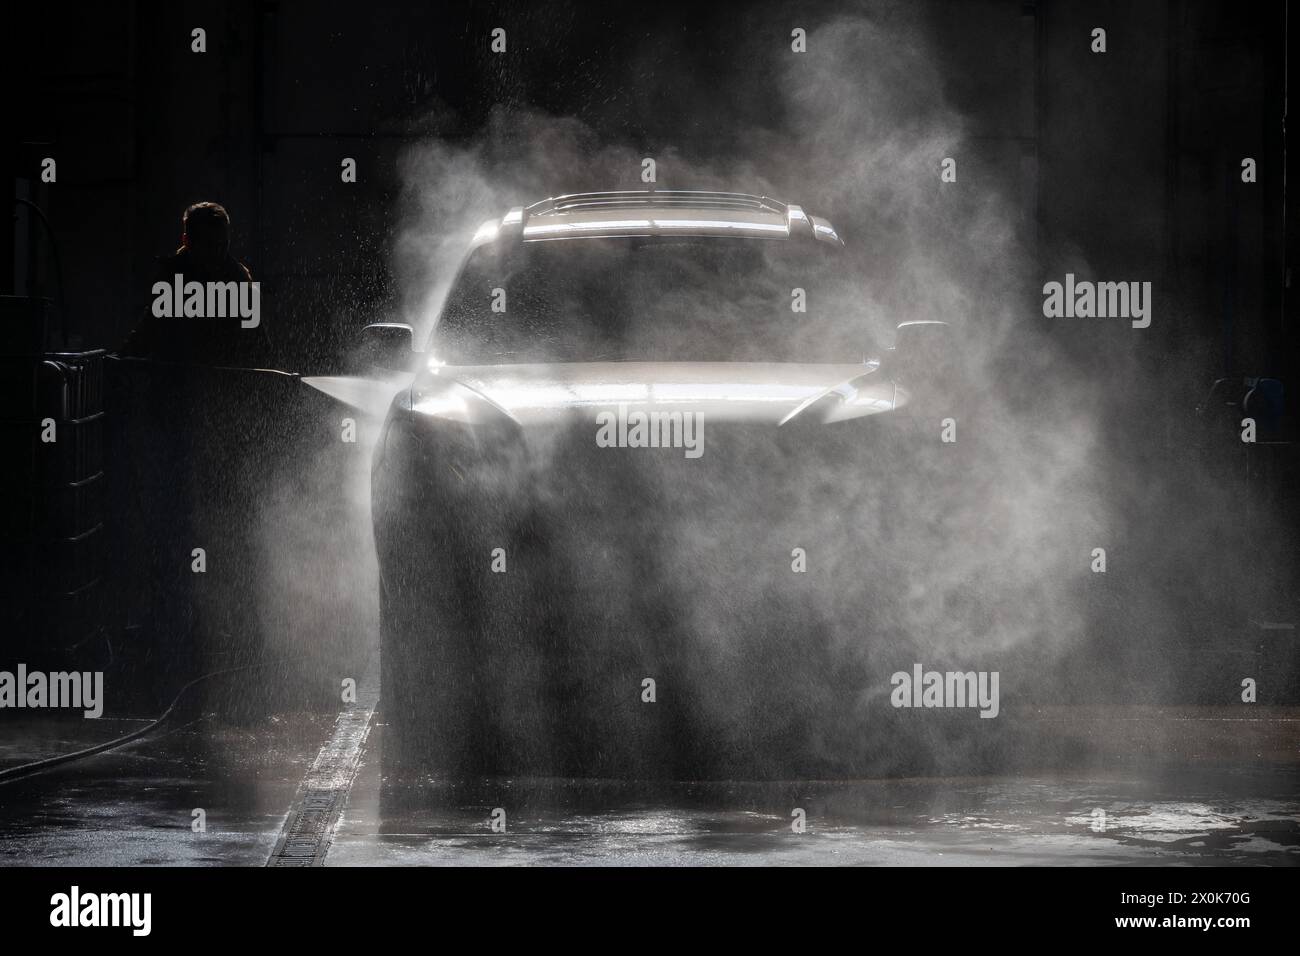 Witness the silhouette of a person washing a car with a water jet in an auto service center. The scene is illuminated by backlighting, highlighting th Stock Photo